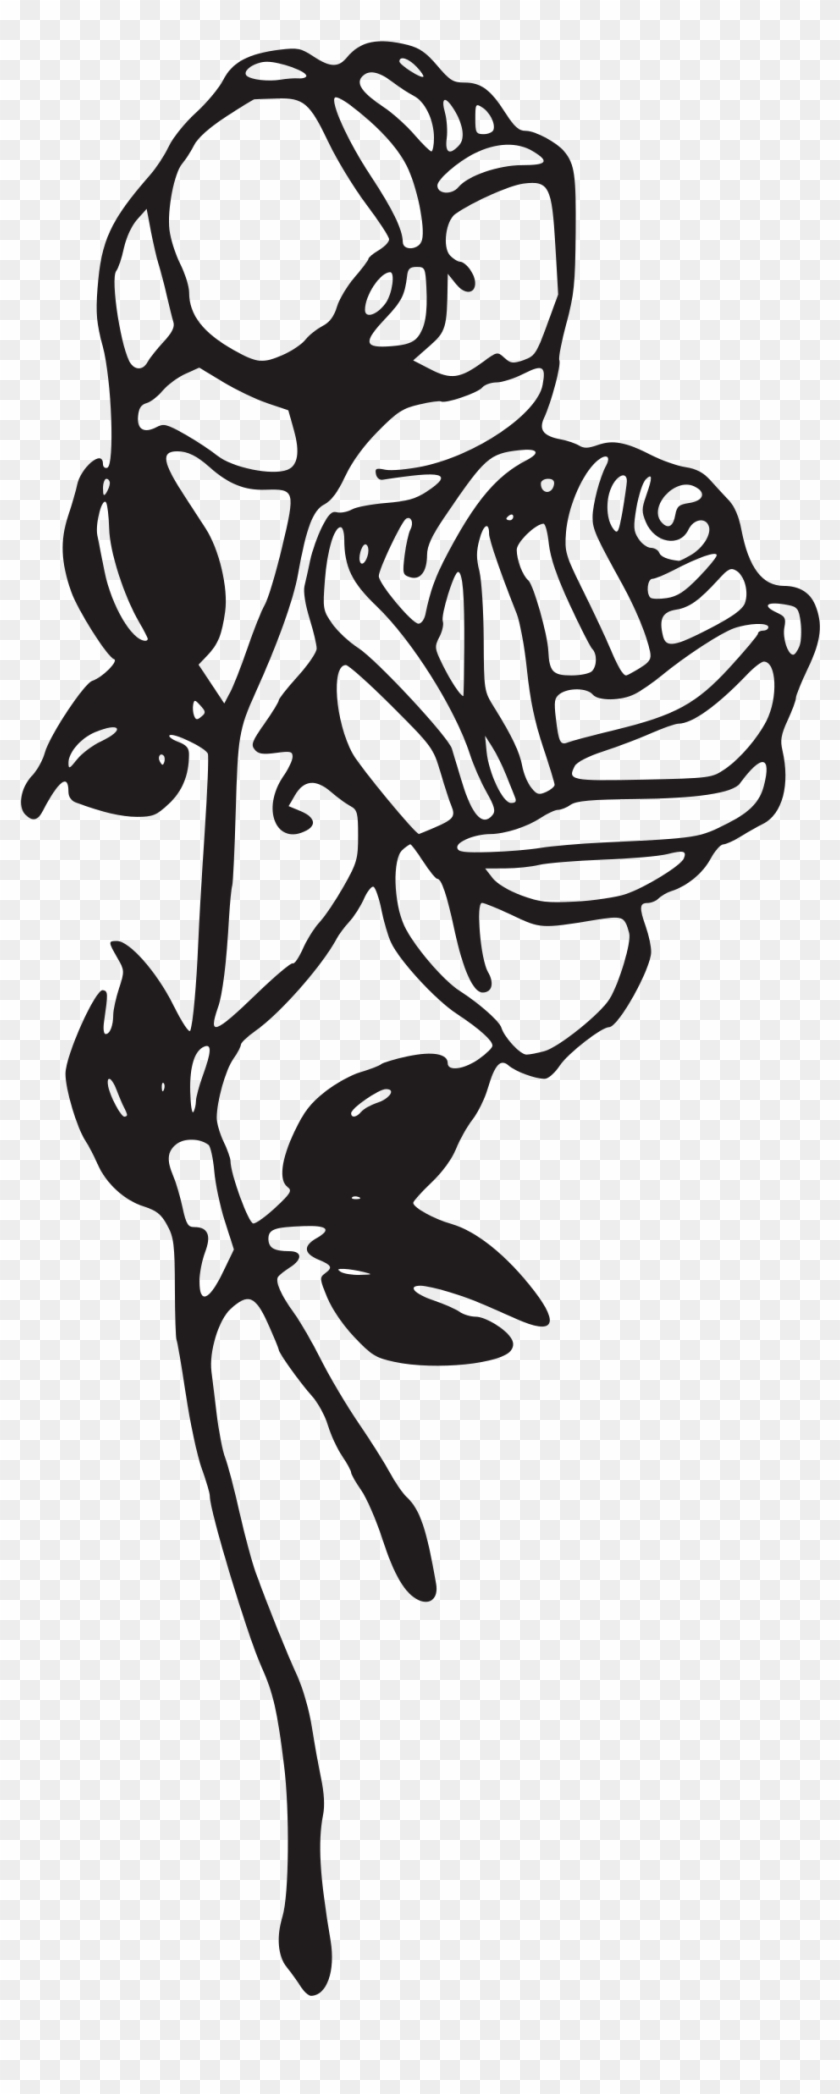 This Free Icons Png Design Of Two Roses - Rose Png Black White #825232